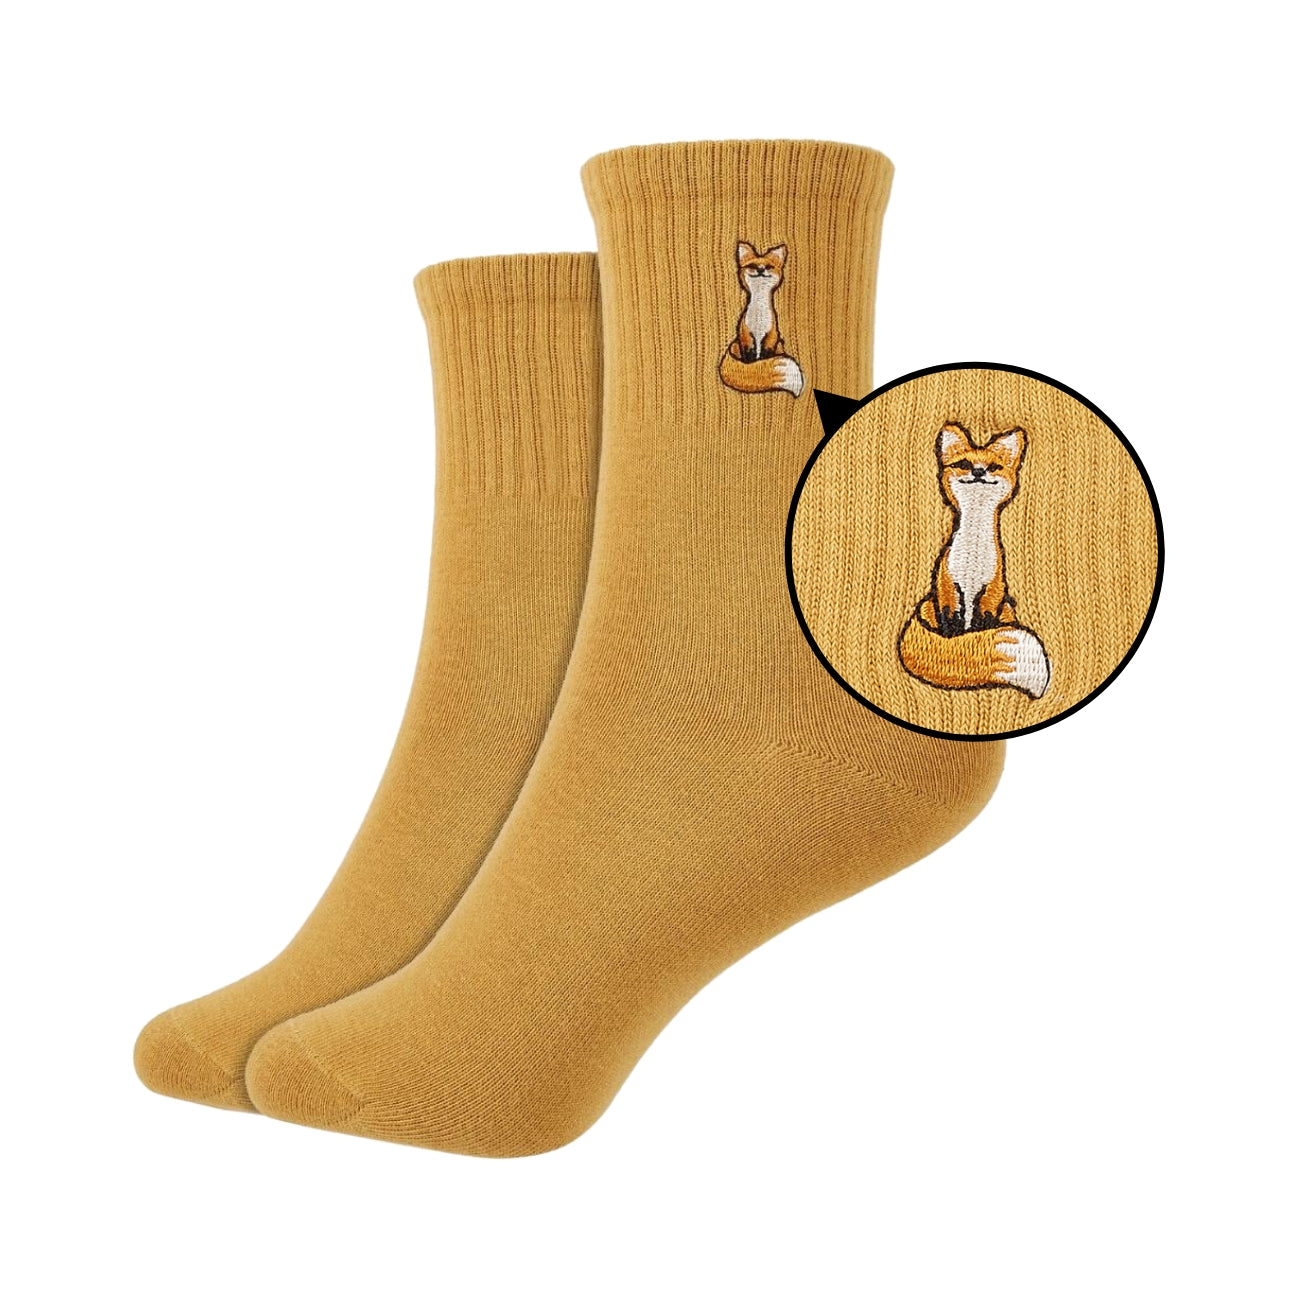 Women's Solid Crew Length Socks with Fox Embroidery - IDENTITY Apparel Shop